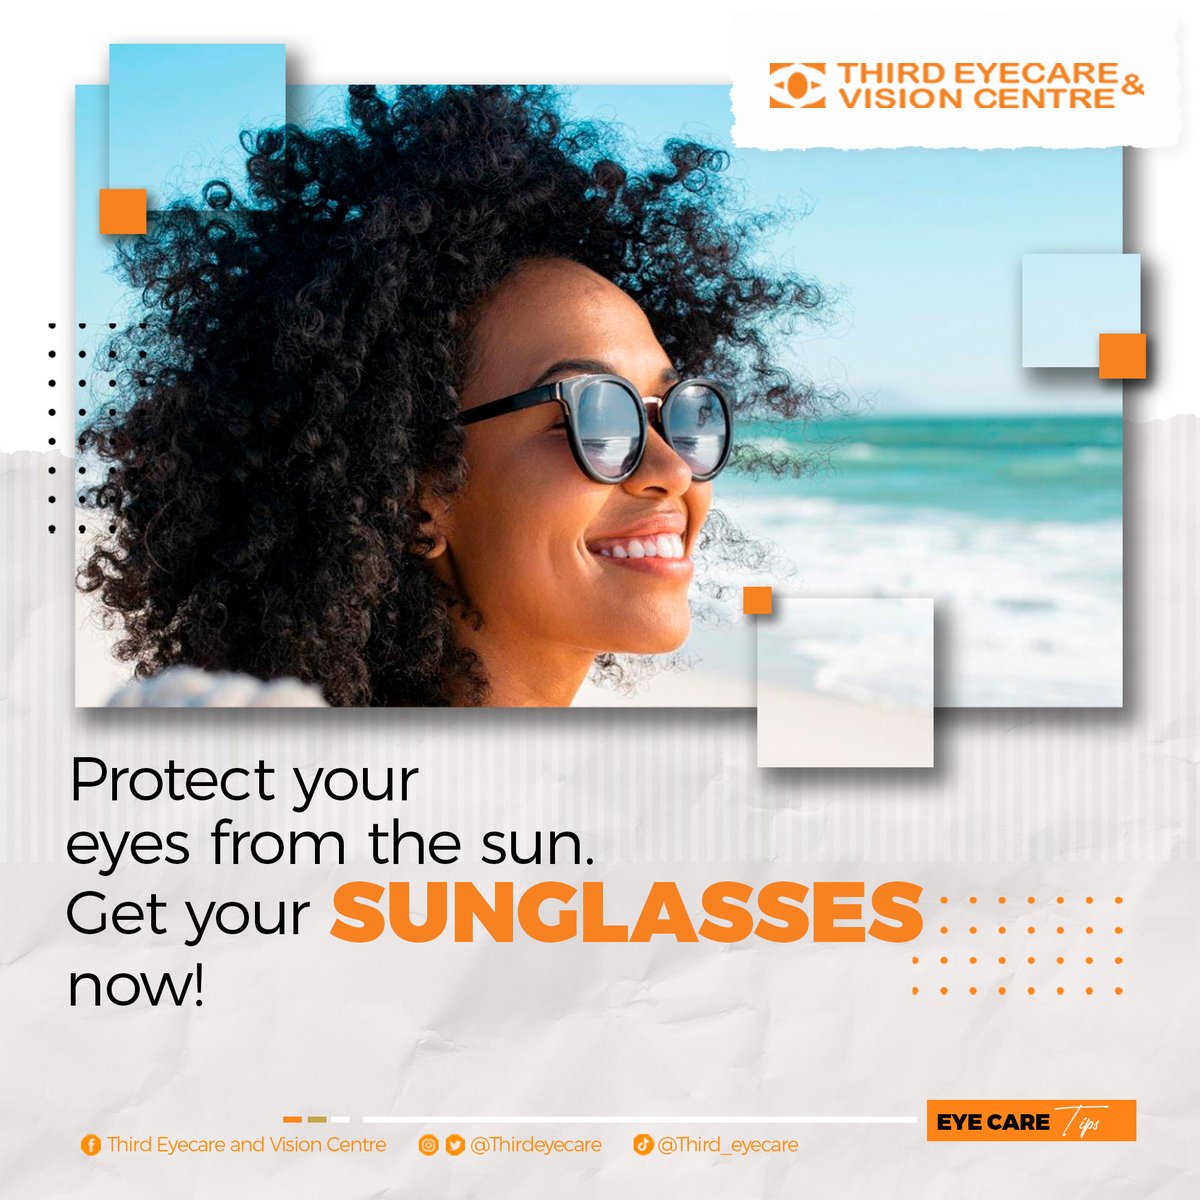 Wear sunglasses with 100% UV protection when you're outside.
#thirdeyecare #besteyeclinicinghana #ghana #NewFrames #sunglasses #shades #protectyoureyes